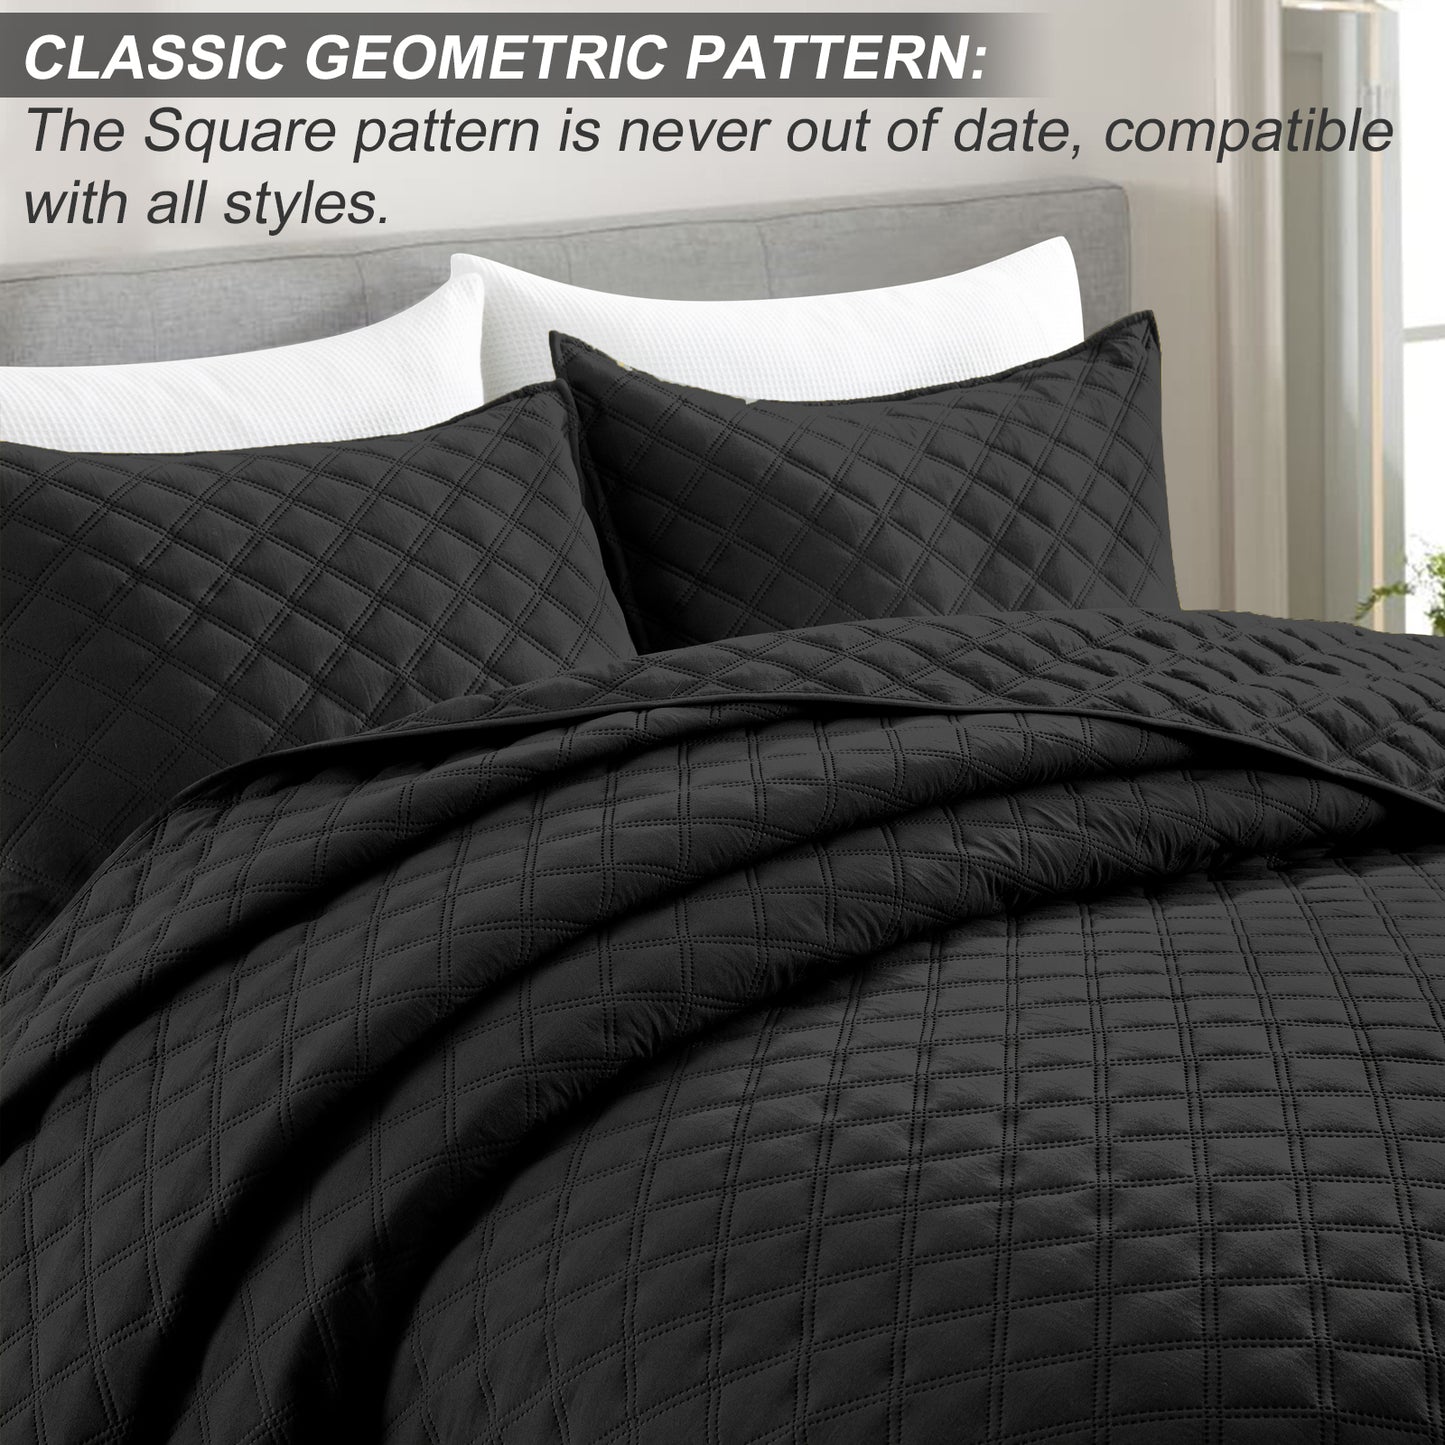 Exclusivo Mezcla 2-Piece Black Twin Size Quilt Set, Box Pattern Ultrasonic Lightweight and Soft Quilts/Bedspreads/Coverlets/Bedding Set (1 Quilt, 1 Pillow Sham) for All Seasons